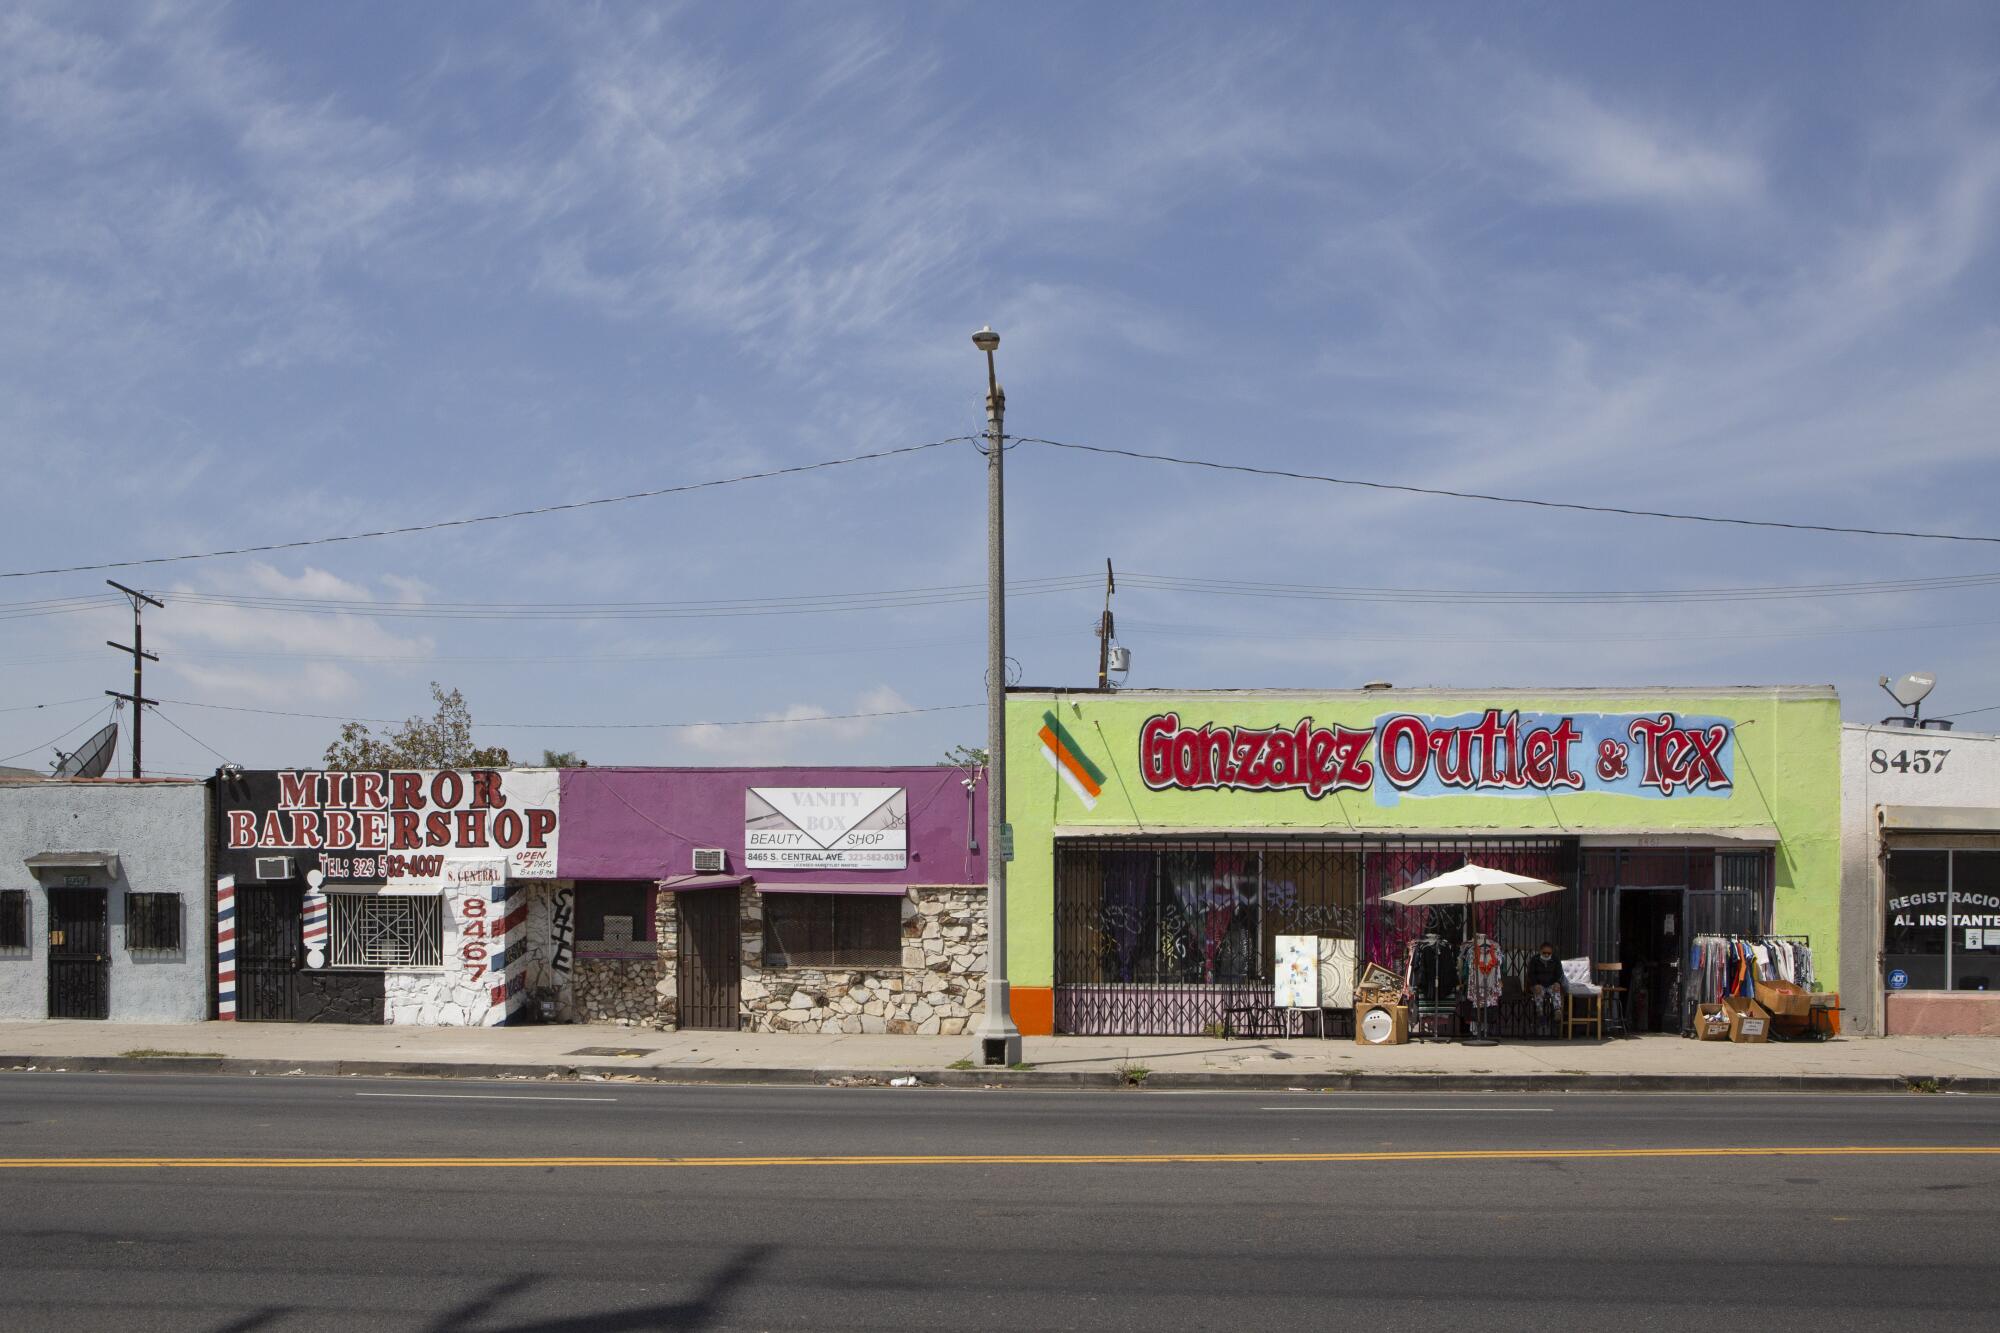 Storefronts on an empty street include Mirror Barbershop and Gonzalez Outlet